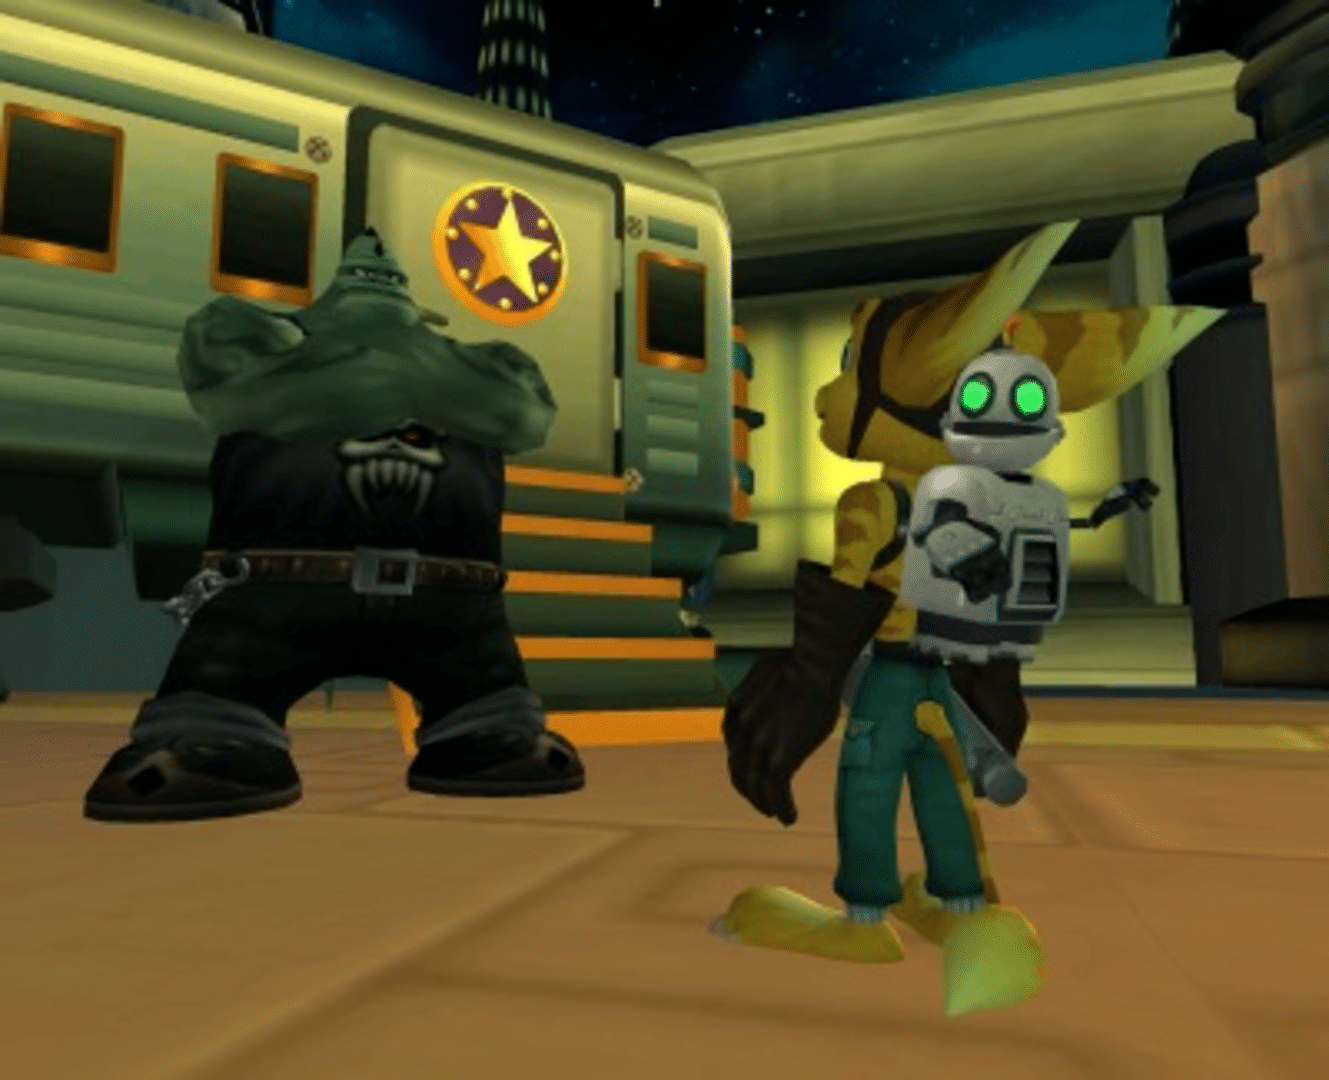 Ratchet & Clank (2002) Review - Hey Poor Player